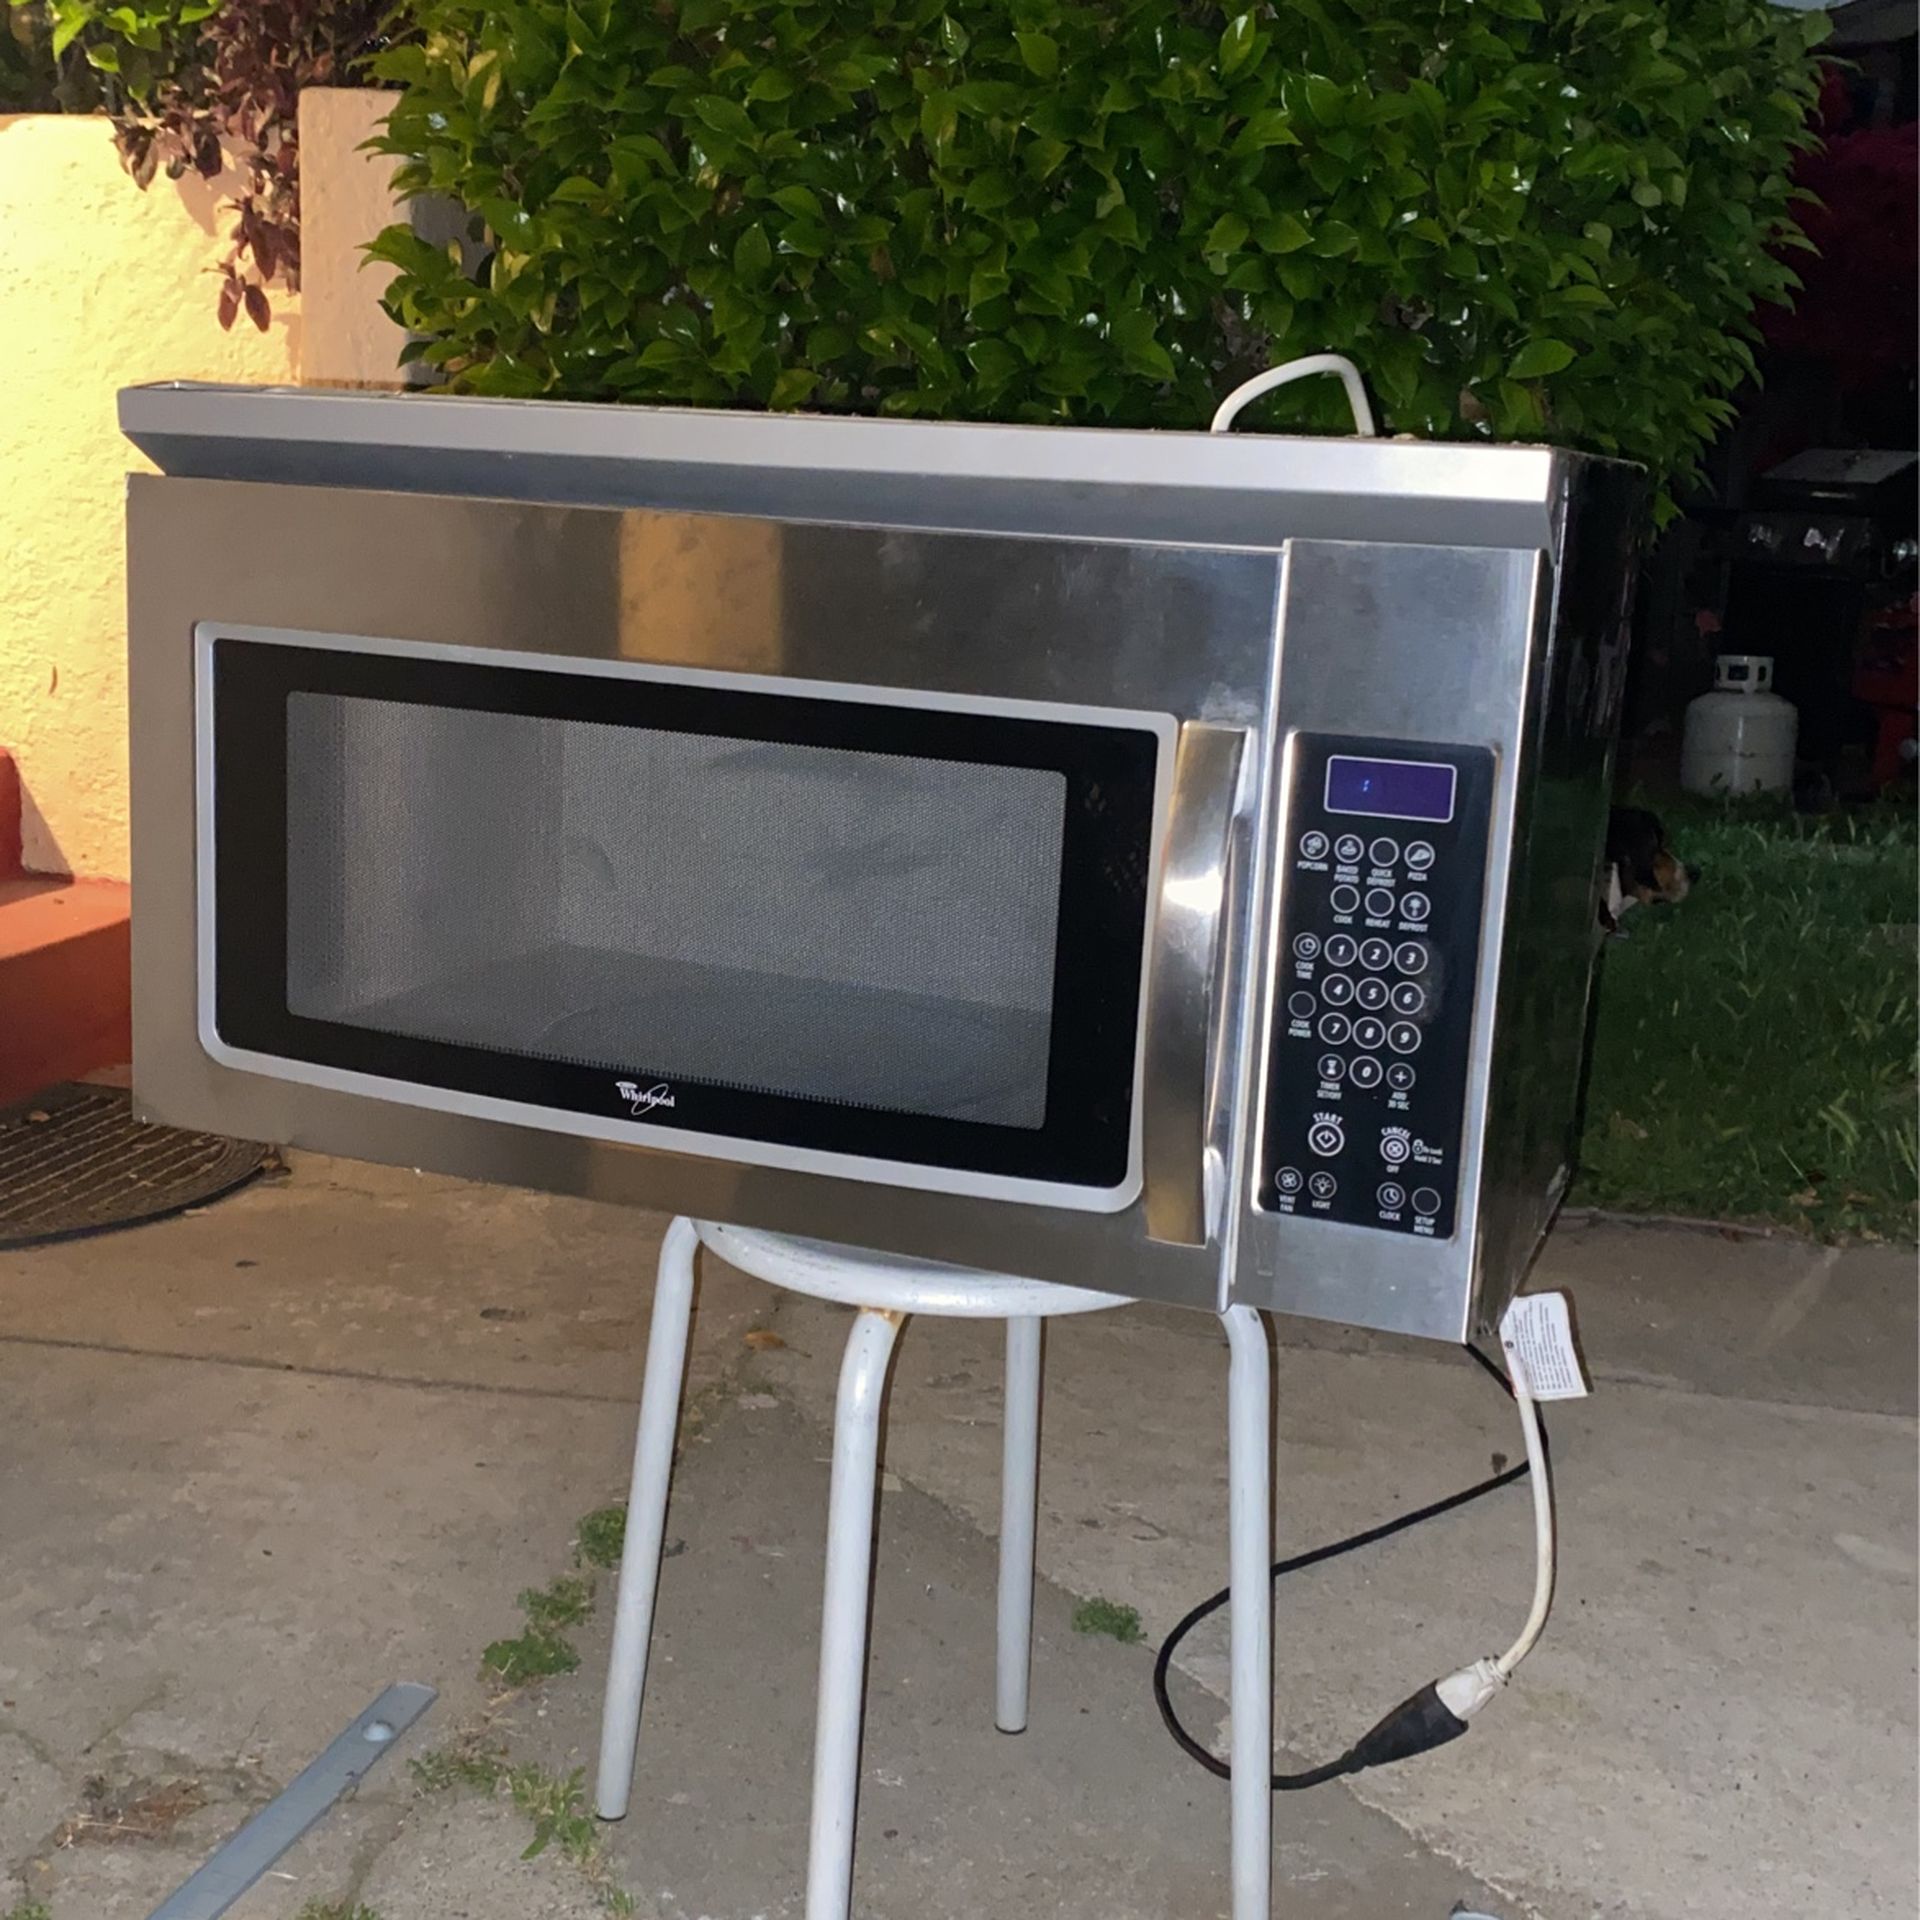 Over Range Microwave Whirlpool Works Great Very Clean Good Condition 30” Installation Hardware Included 